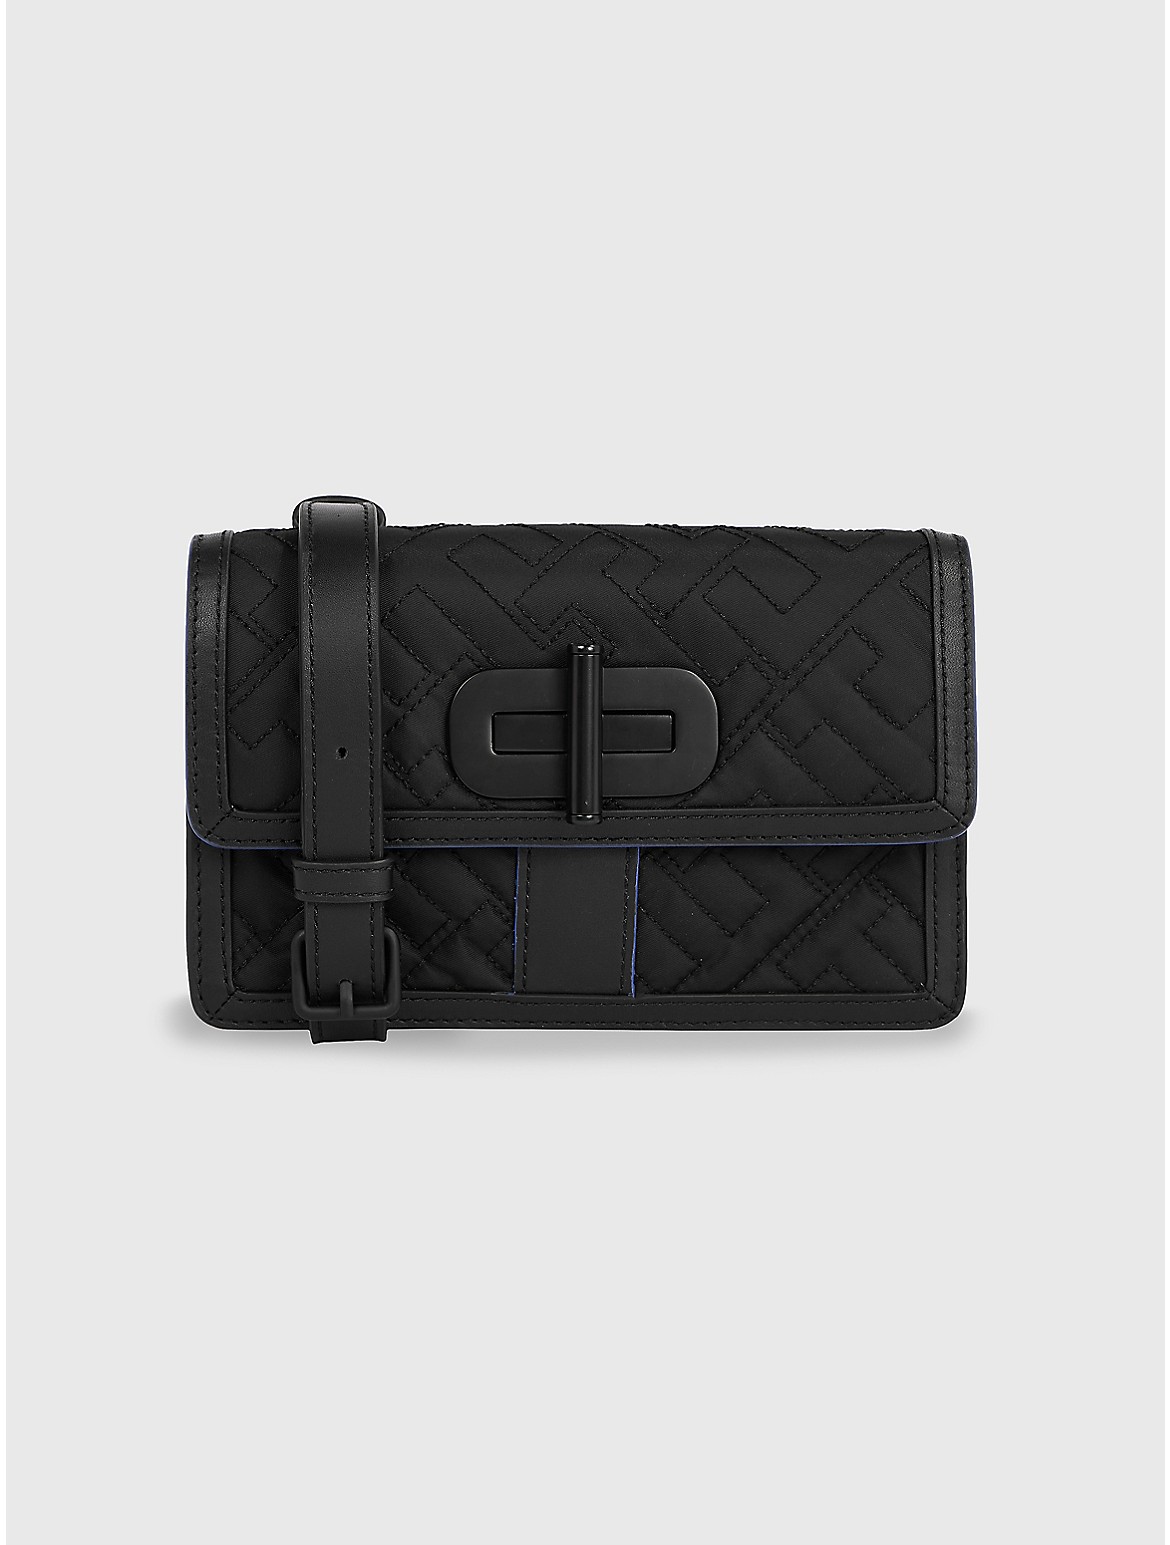 Tommy Hilfiger Men's Turnlock Quilted TH Crossbody Bag - Black